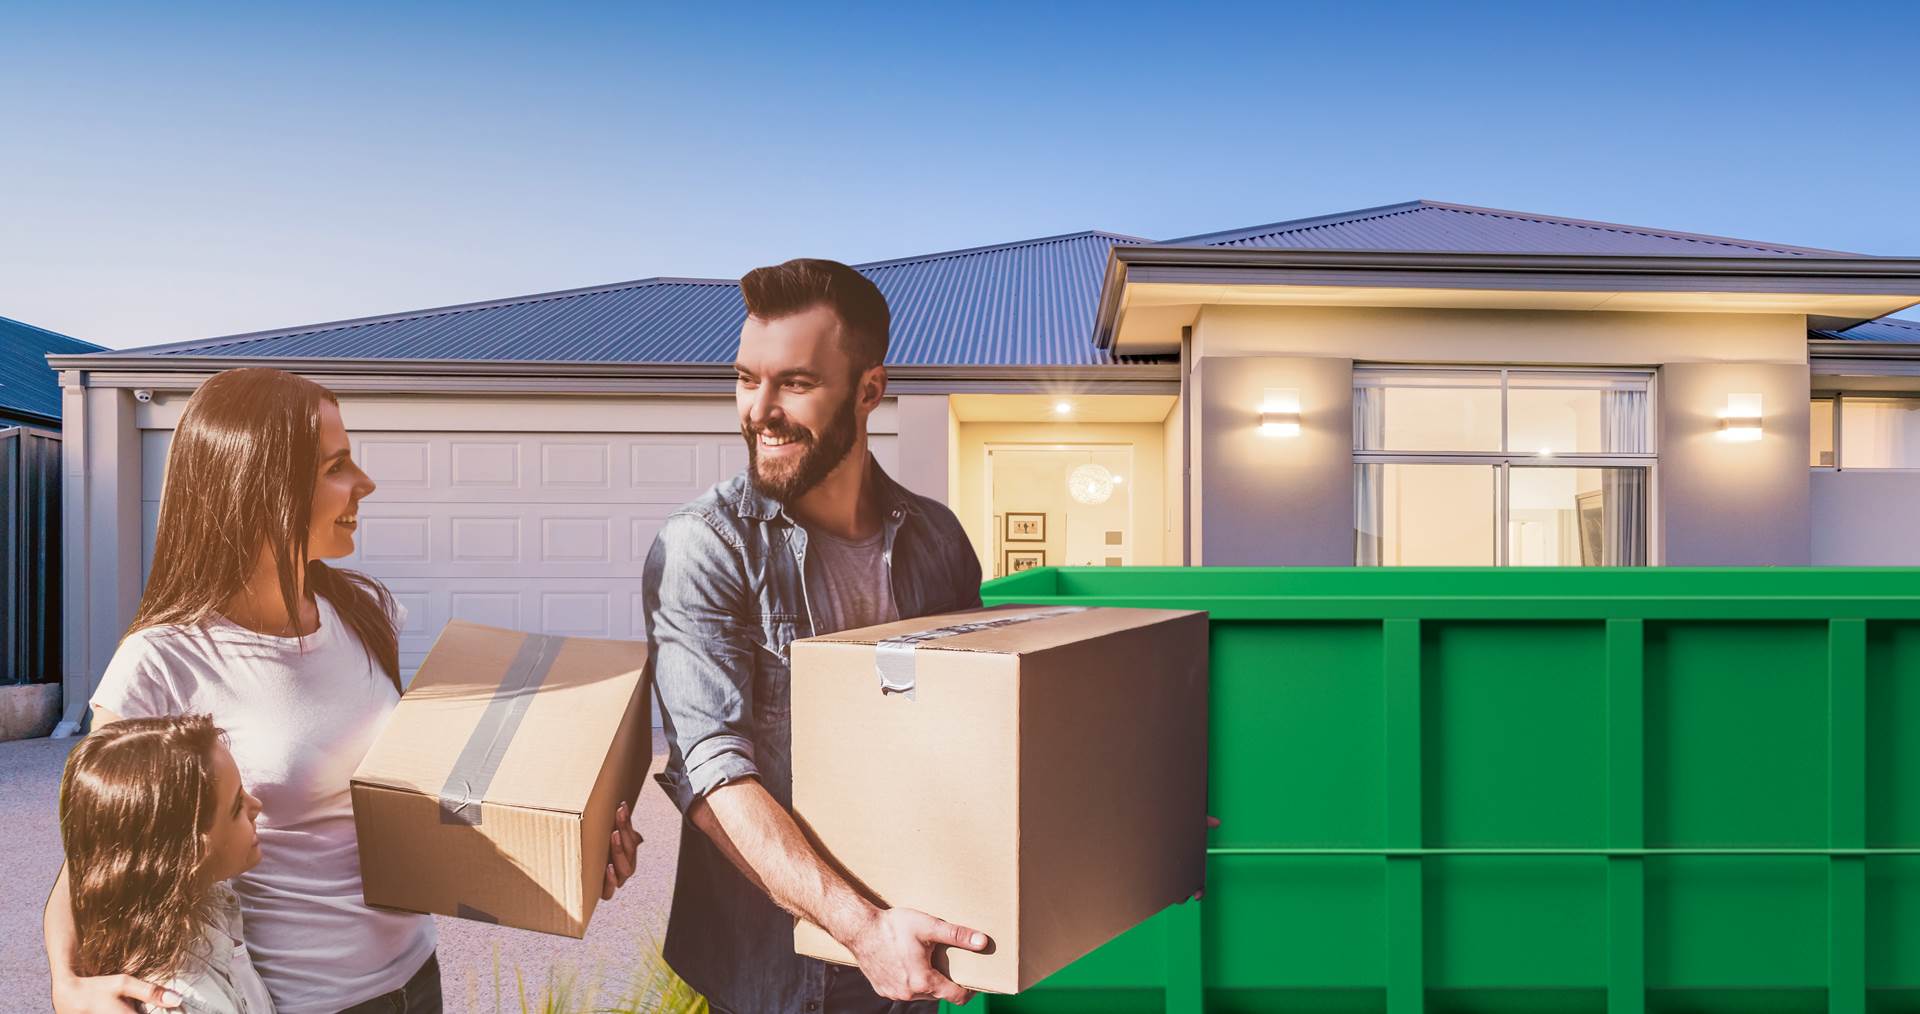 Benefits Of Dumpster Rental Services For Your Business